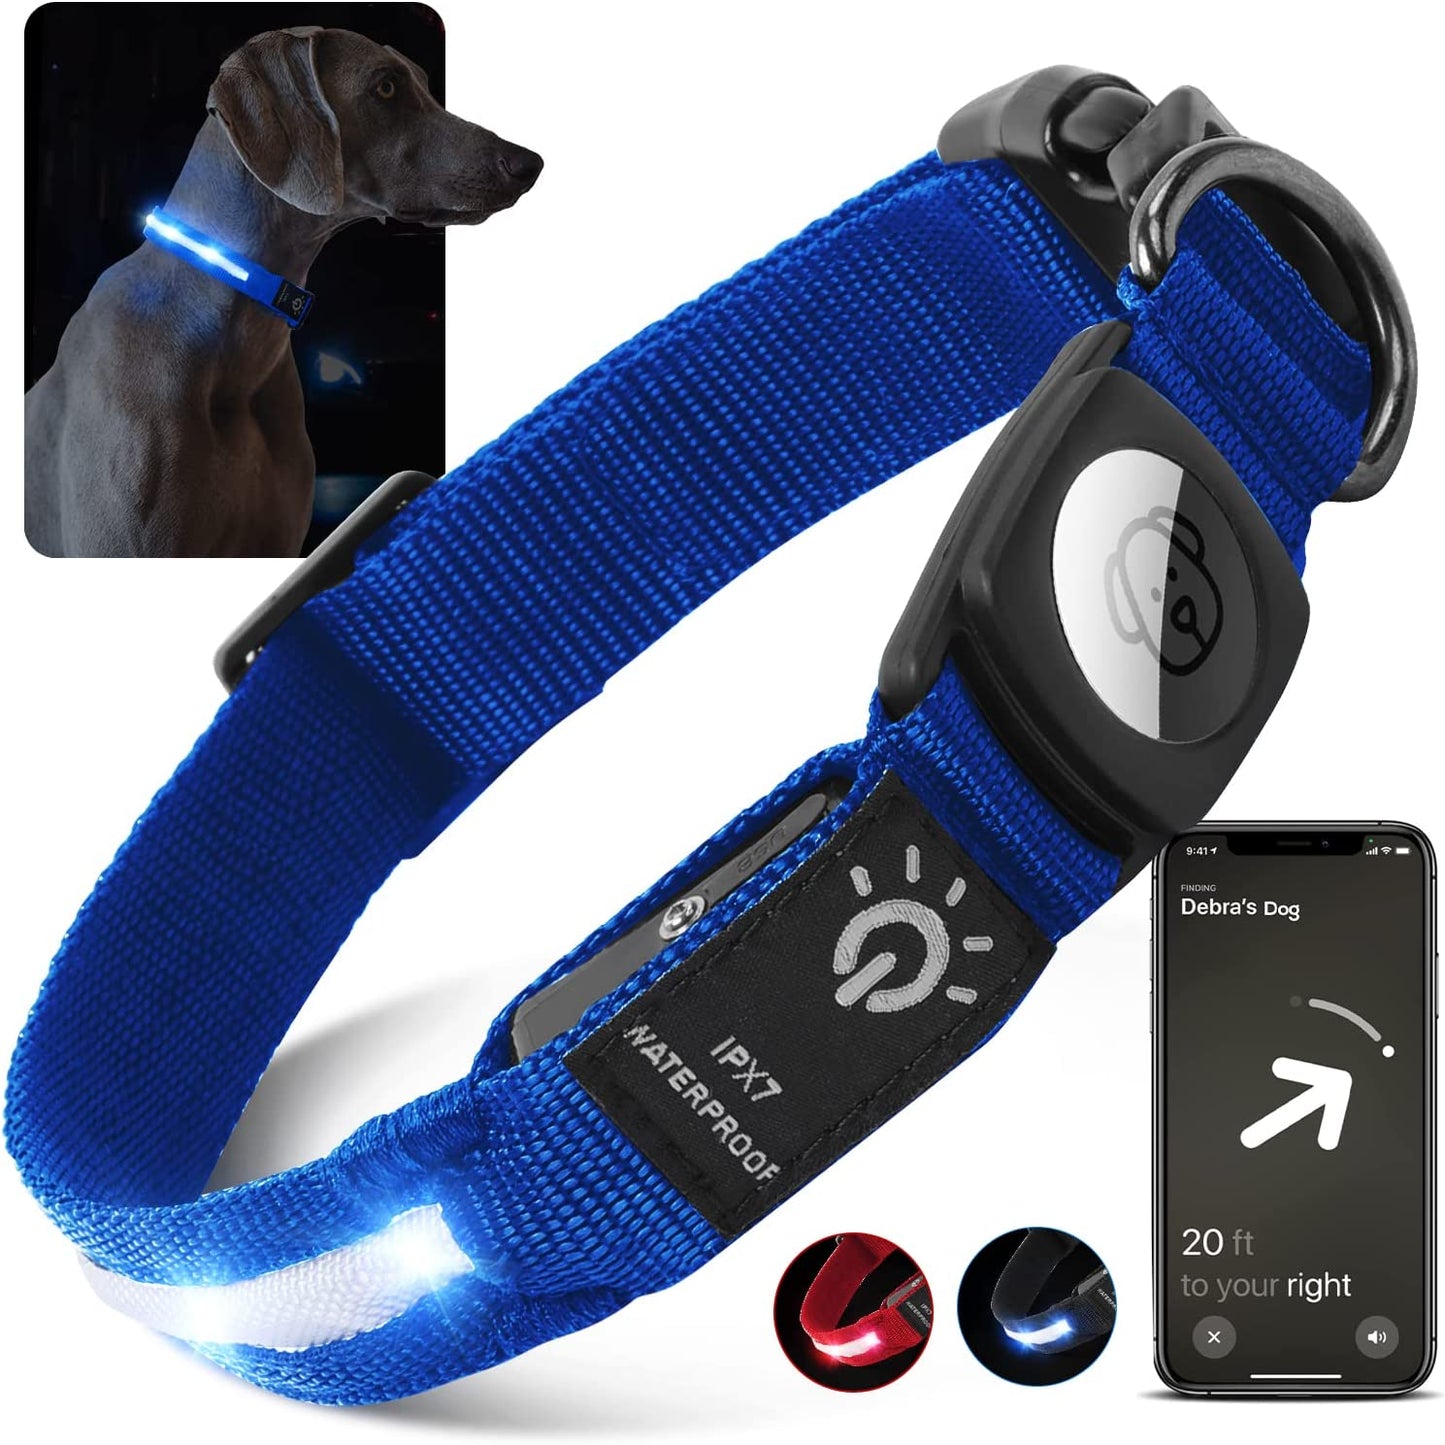 LED Air Tag Dog Collar - Light up Dog Collar[Ipx7 Waterproof] with Apple Air Tag Holder Case, Durable Rechargeable Lighted Air Tag Dog Collar Accessories for Puppy Dogs(S, Black) Electronics > GPS Accessories > GPS Cases typecase Blue Large(16-22'') 